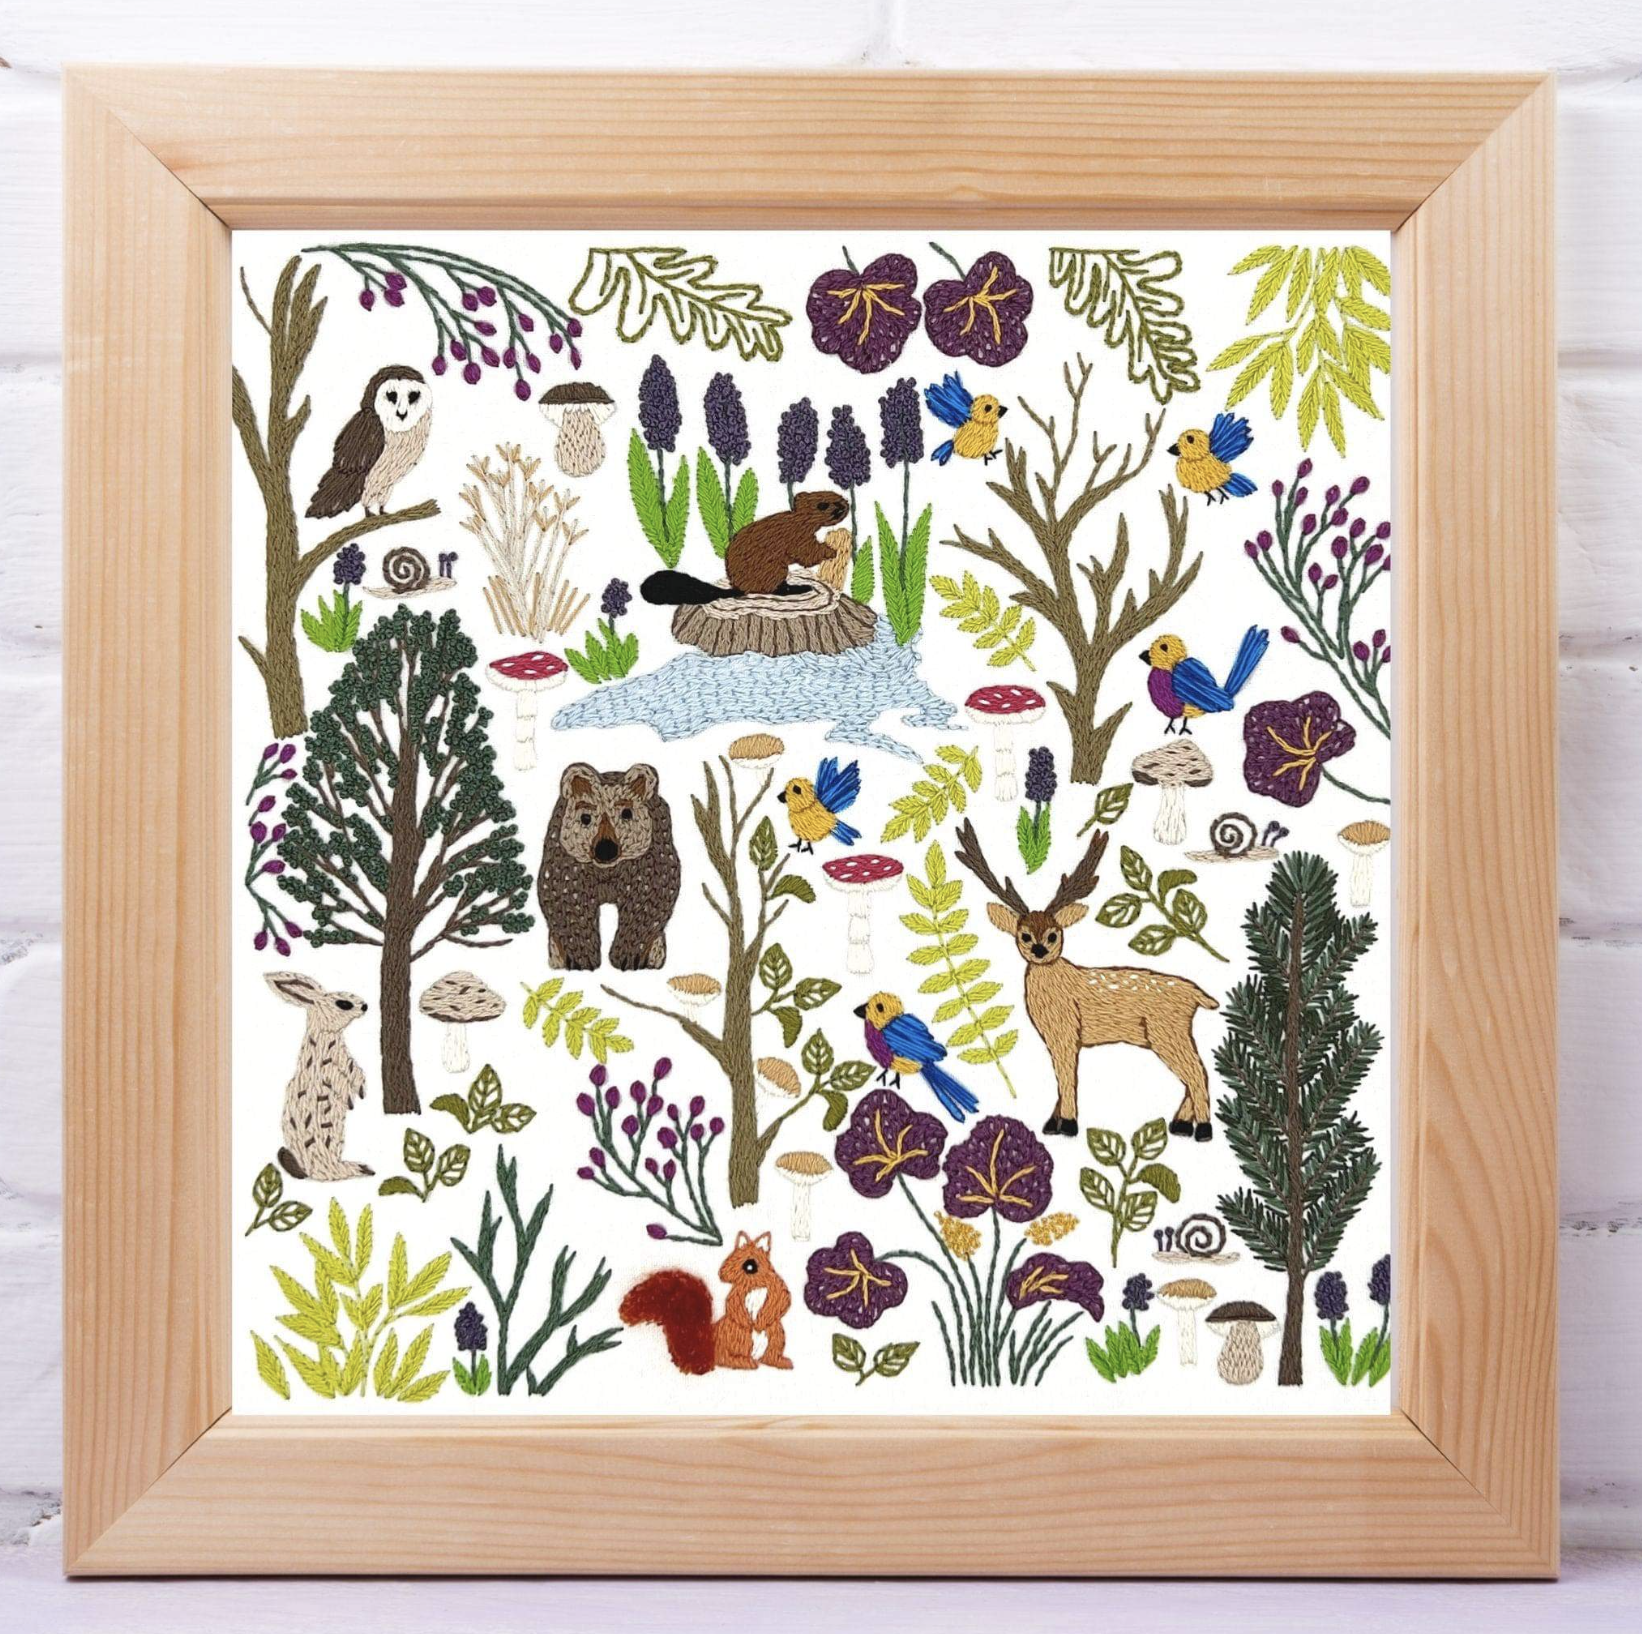 Into the Forest Hand Embroidery Kit